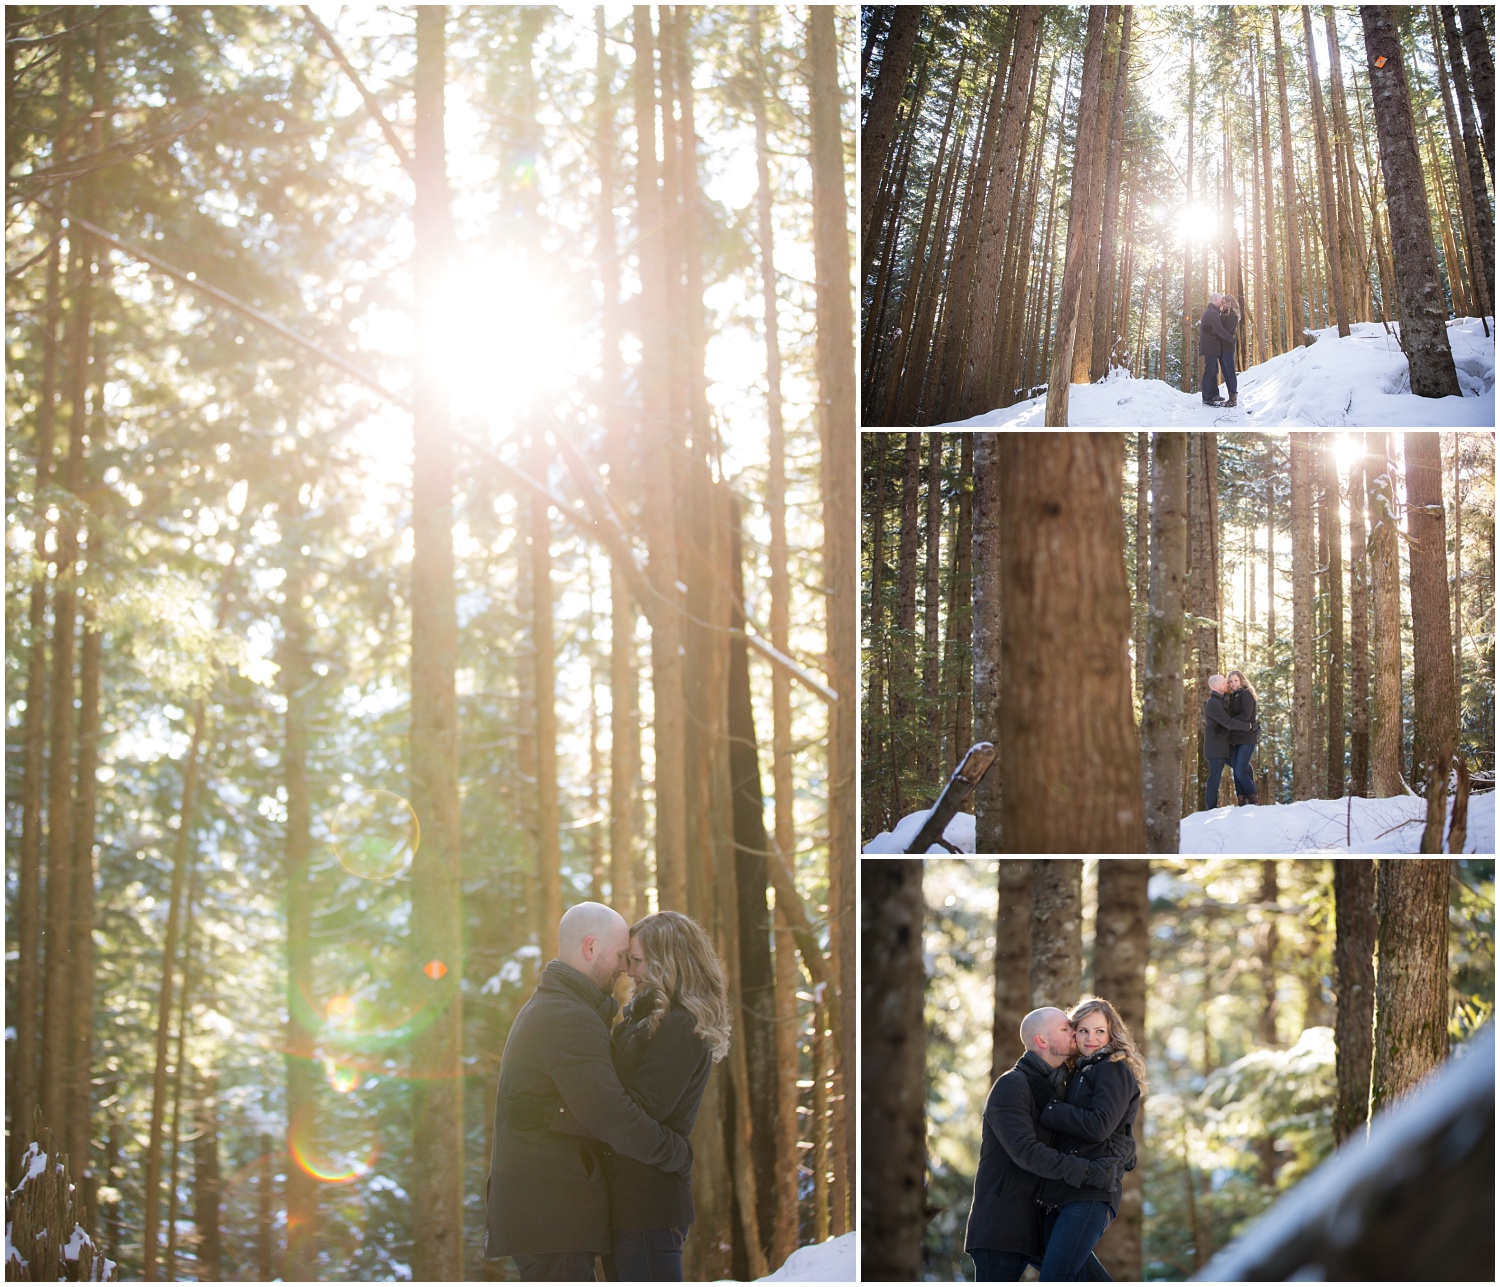 Amazing Day Photography - Langely Wedding Photographer - Snow Engagement Session - Mount Seymour Engagement - Winter Engagement Session - North Vancouver Engagement Session  (5).jpg